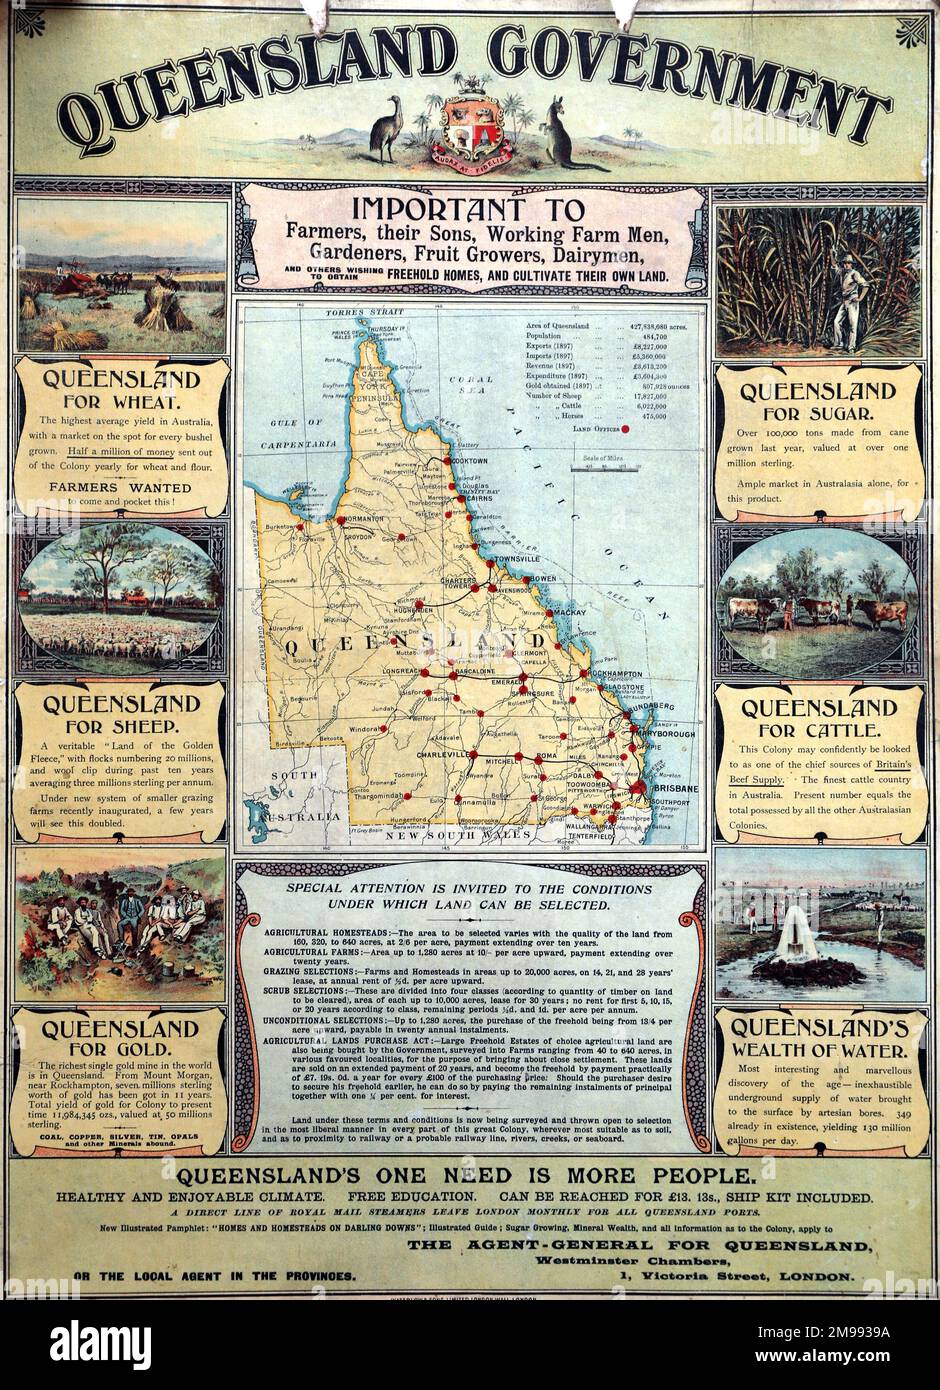 Advert for Queensland, Australia, a call for more people to live and work there. Stock Photo